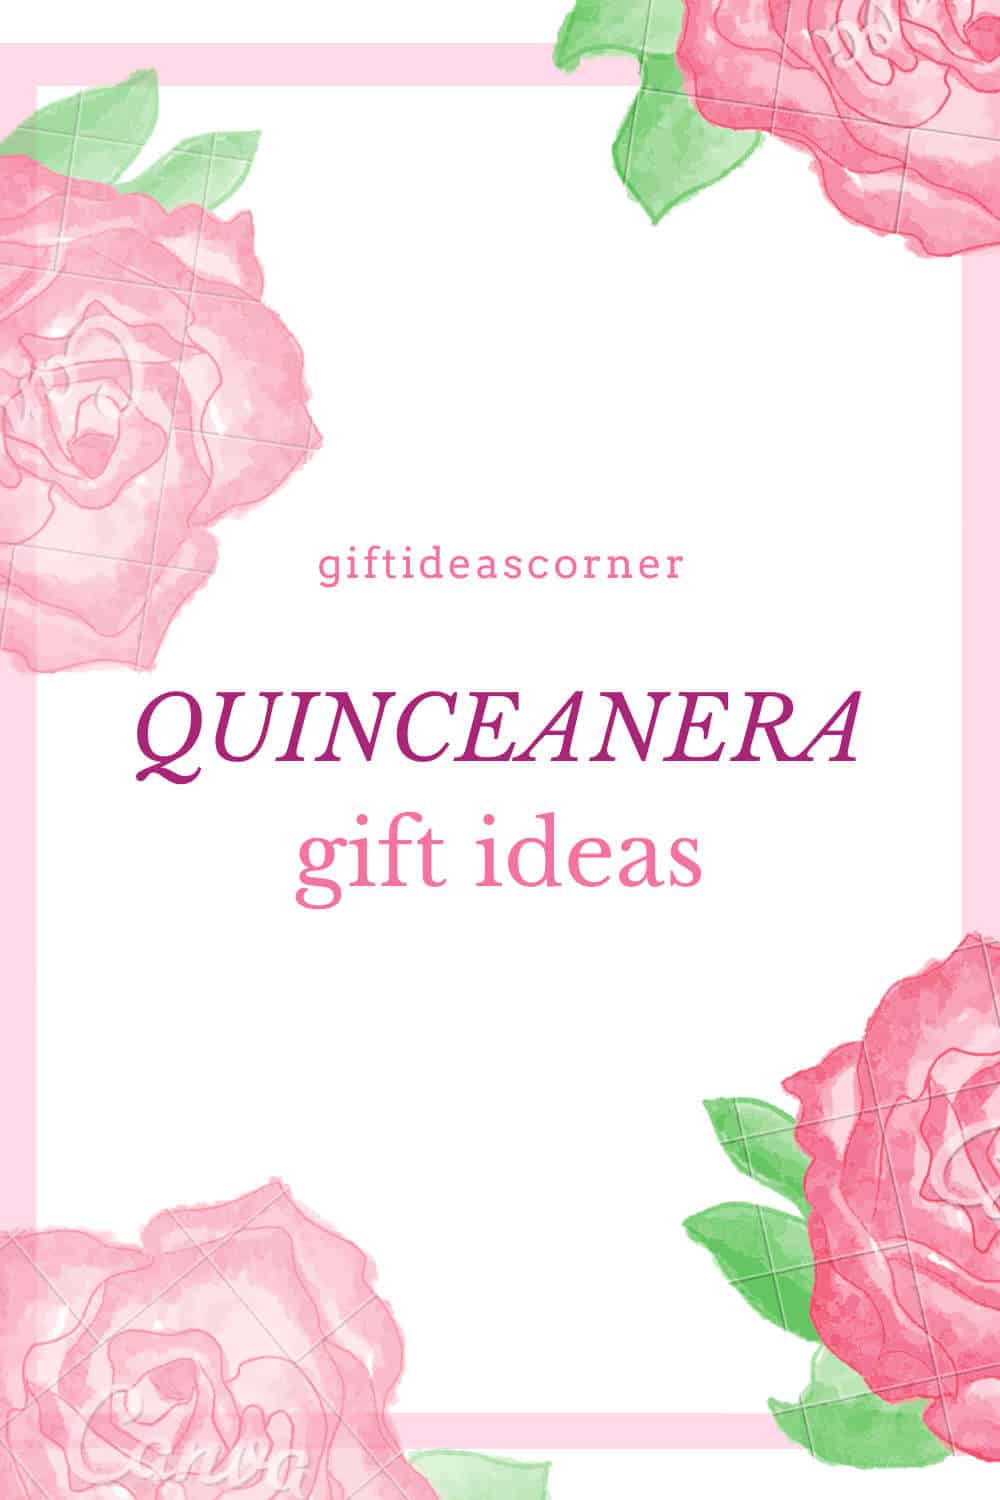 quinceanera gifts 1